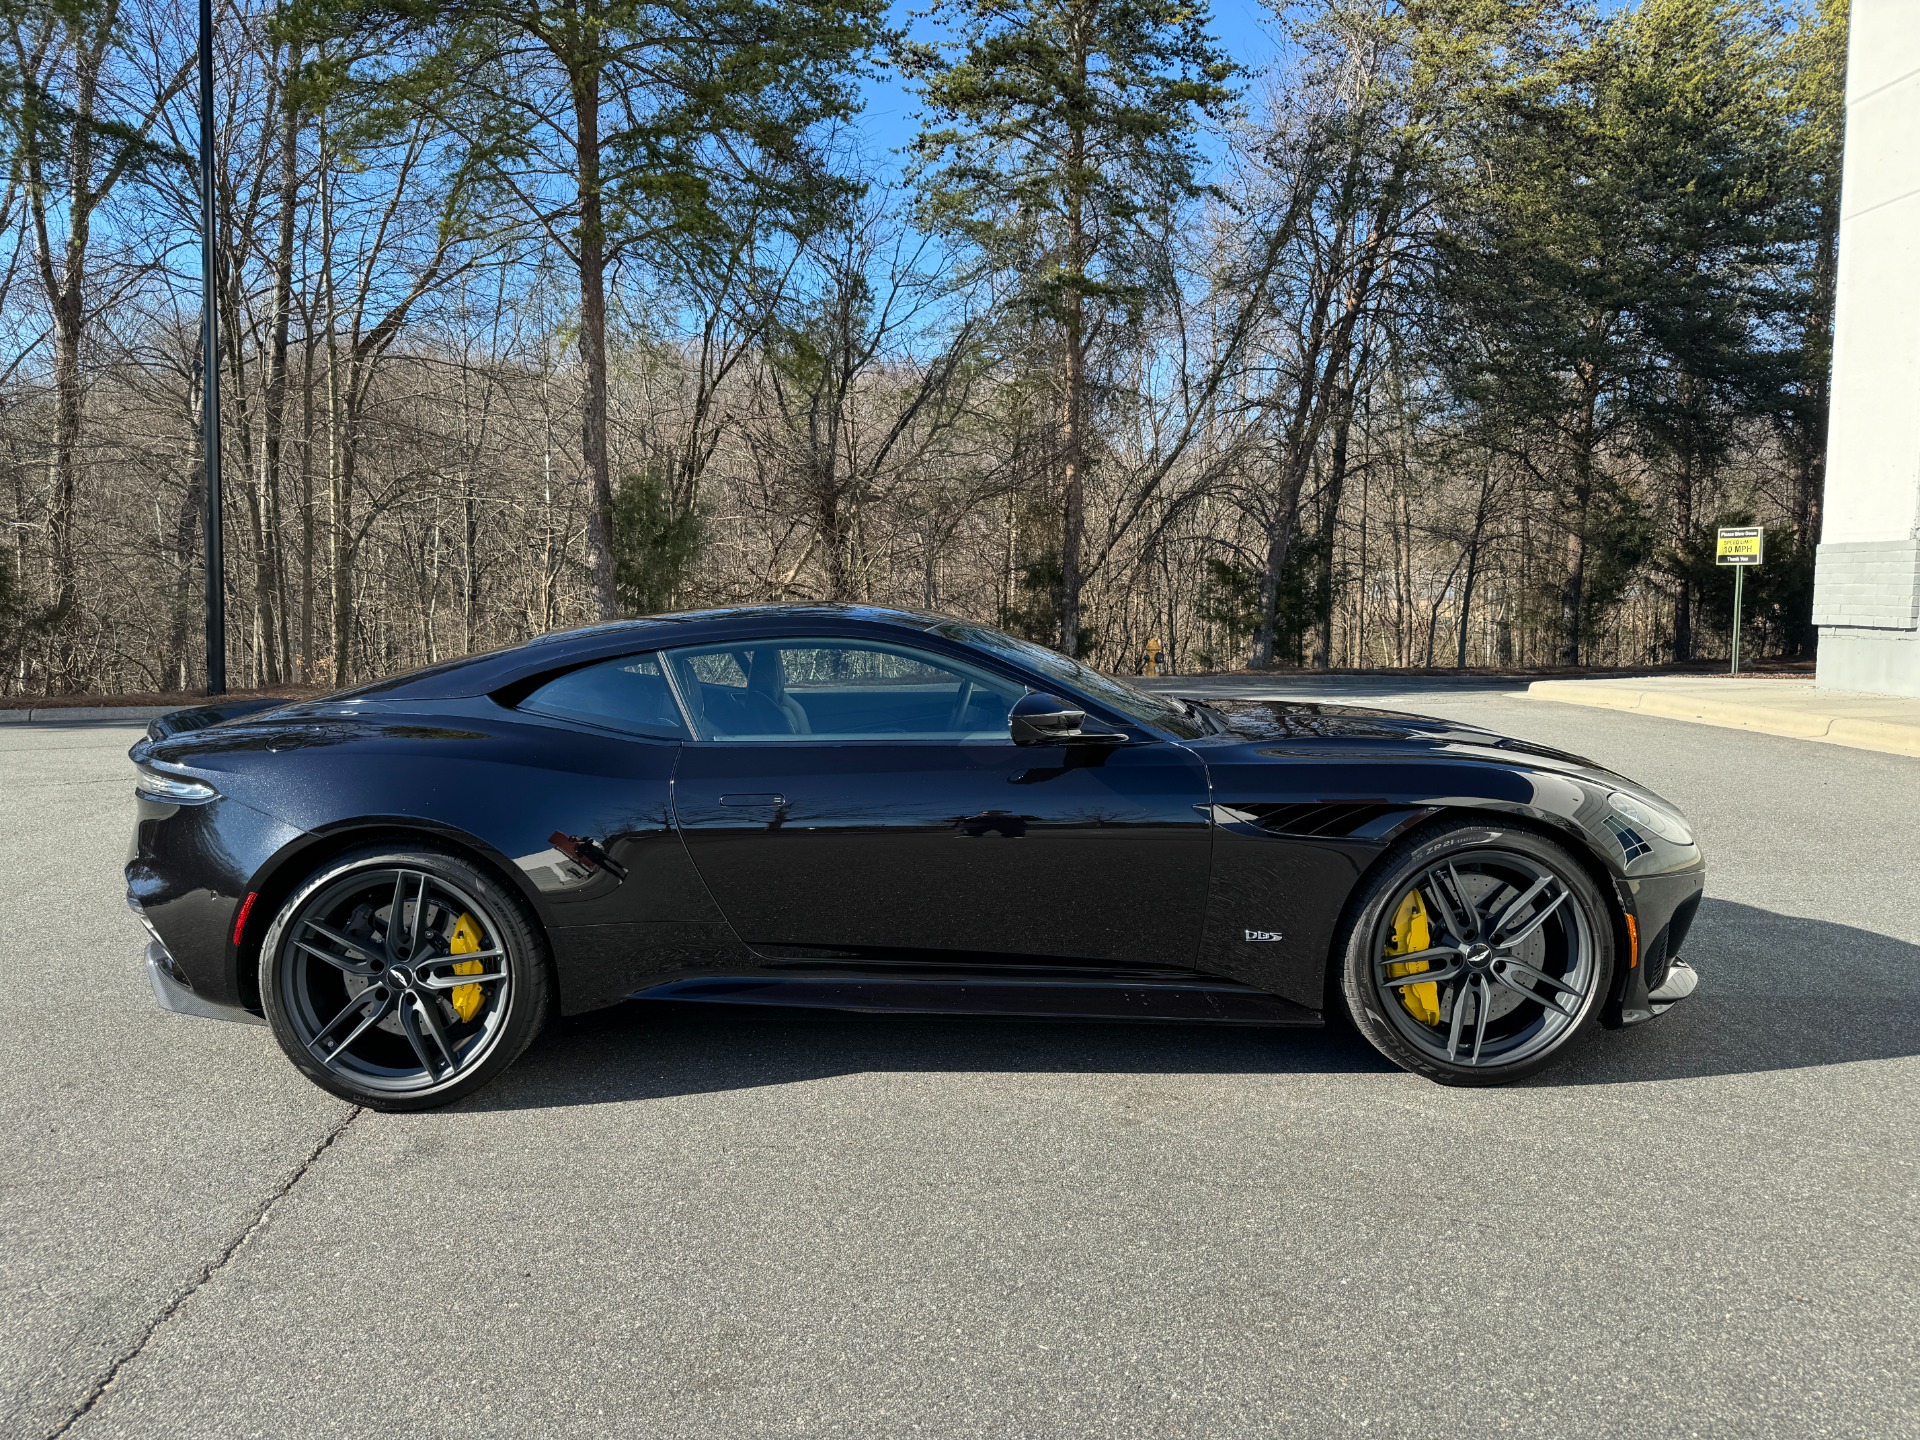 Used 2020 Aston Martin DBS SUPERLEGGERA / CARBON FIBER / V12 750HP / ACCENT STITCHING for sale $240,000 at Formula Imports in Charlotte NC 28227 16